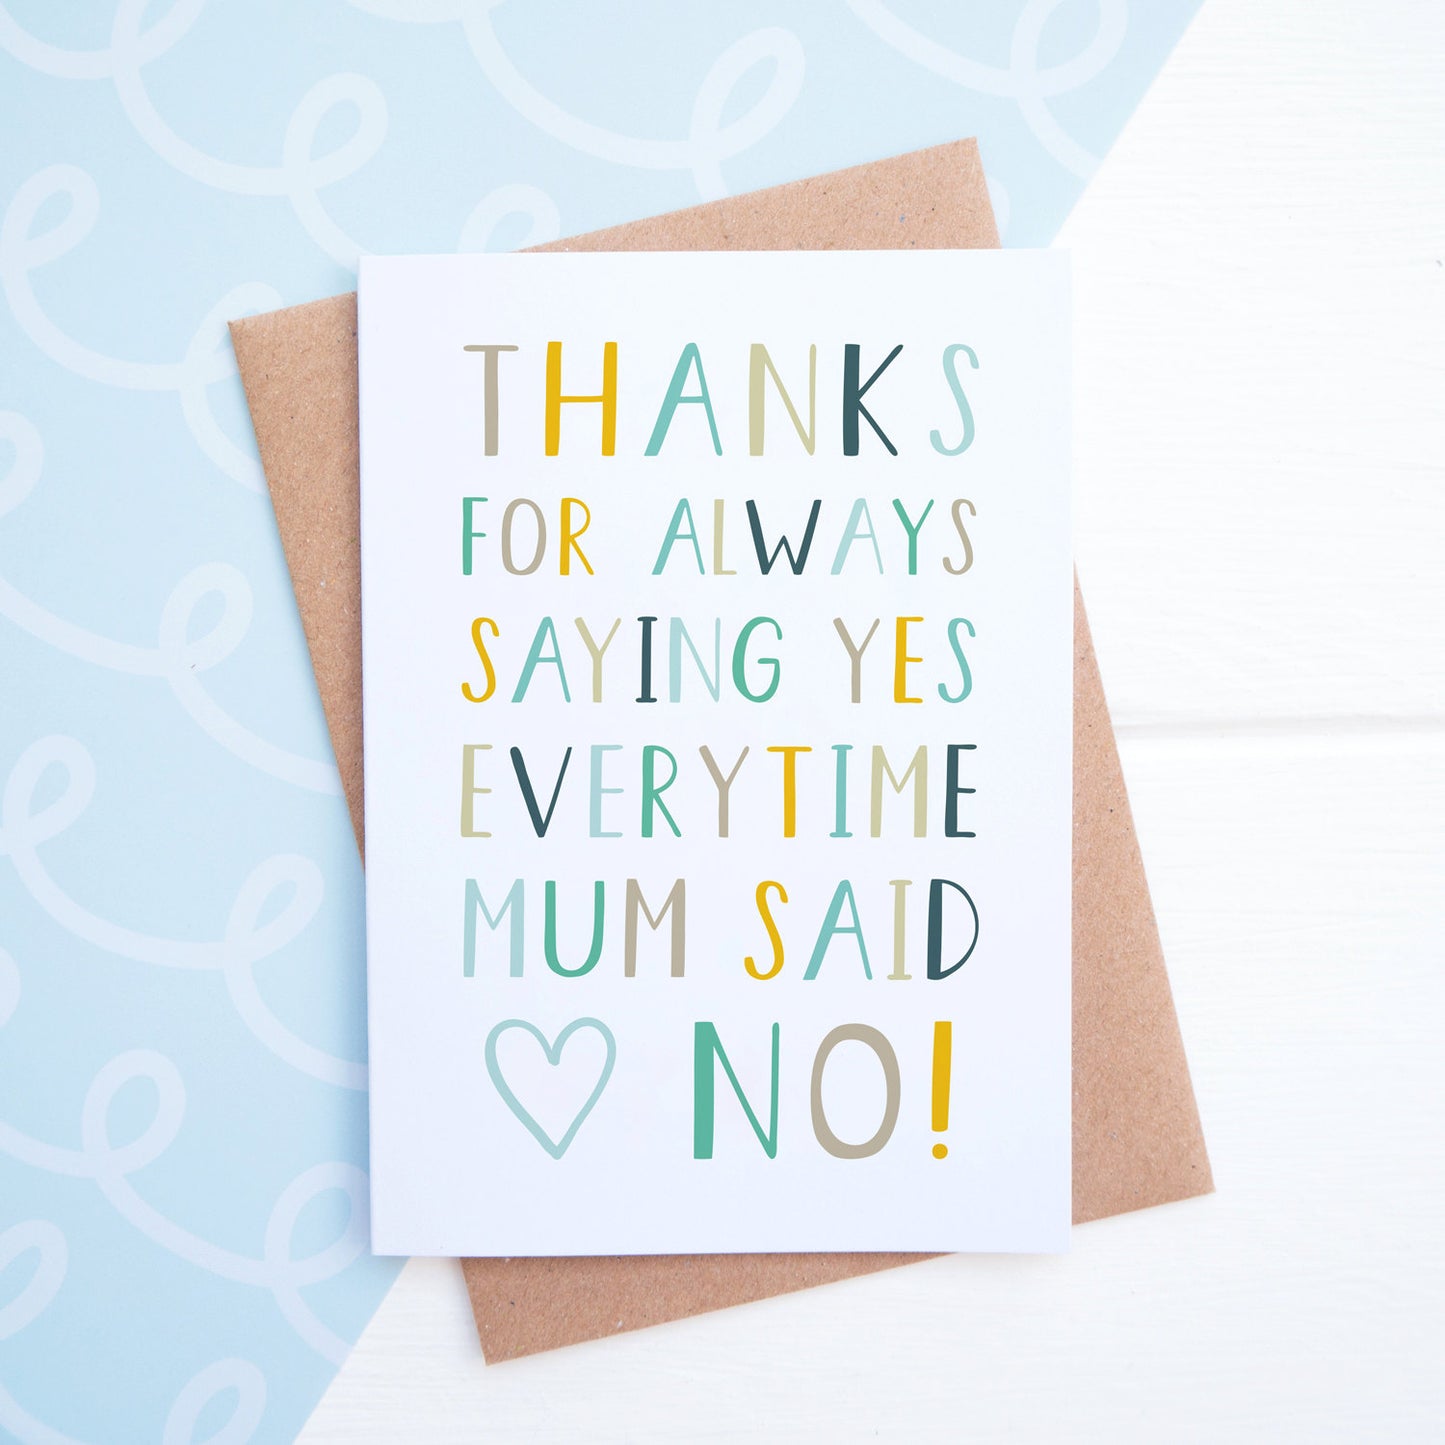 Thanks for saying yes everytime mum said no fathers day card